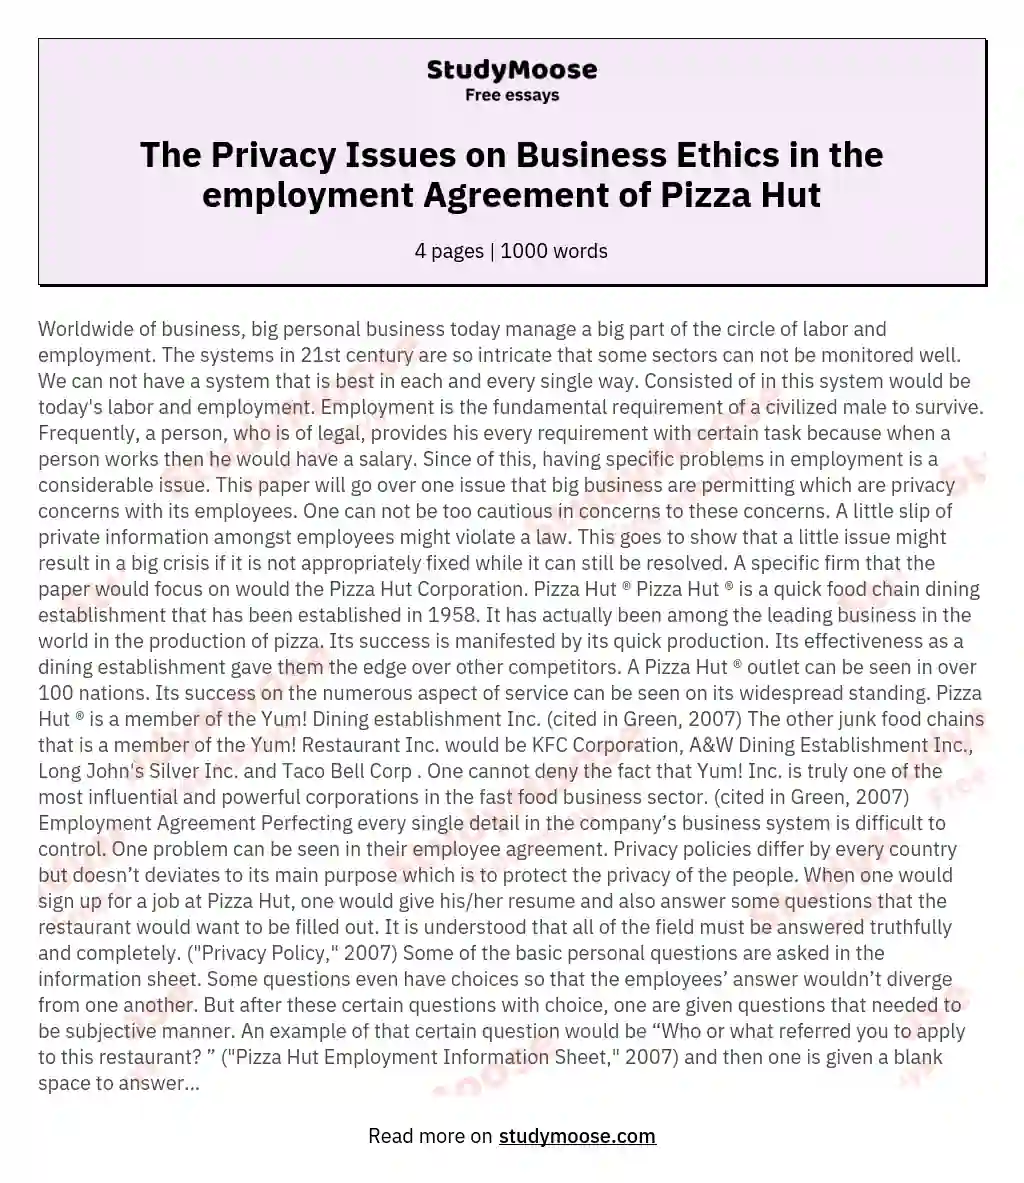 The Privacy Issues on Business Ethics in the employment Agreement of Pizza Hut